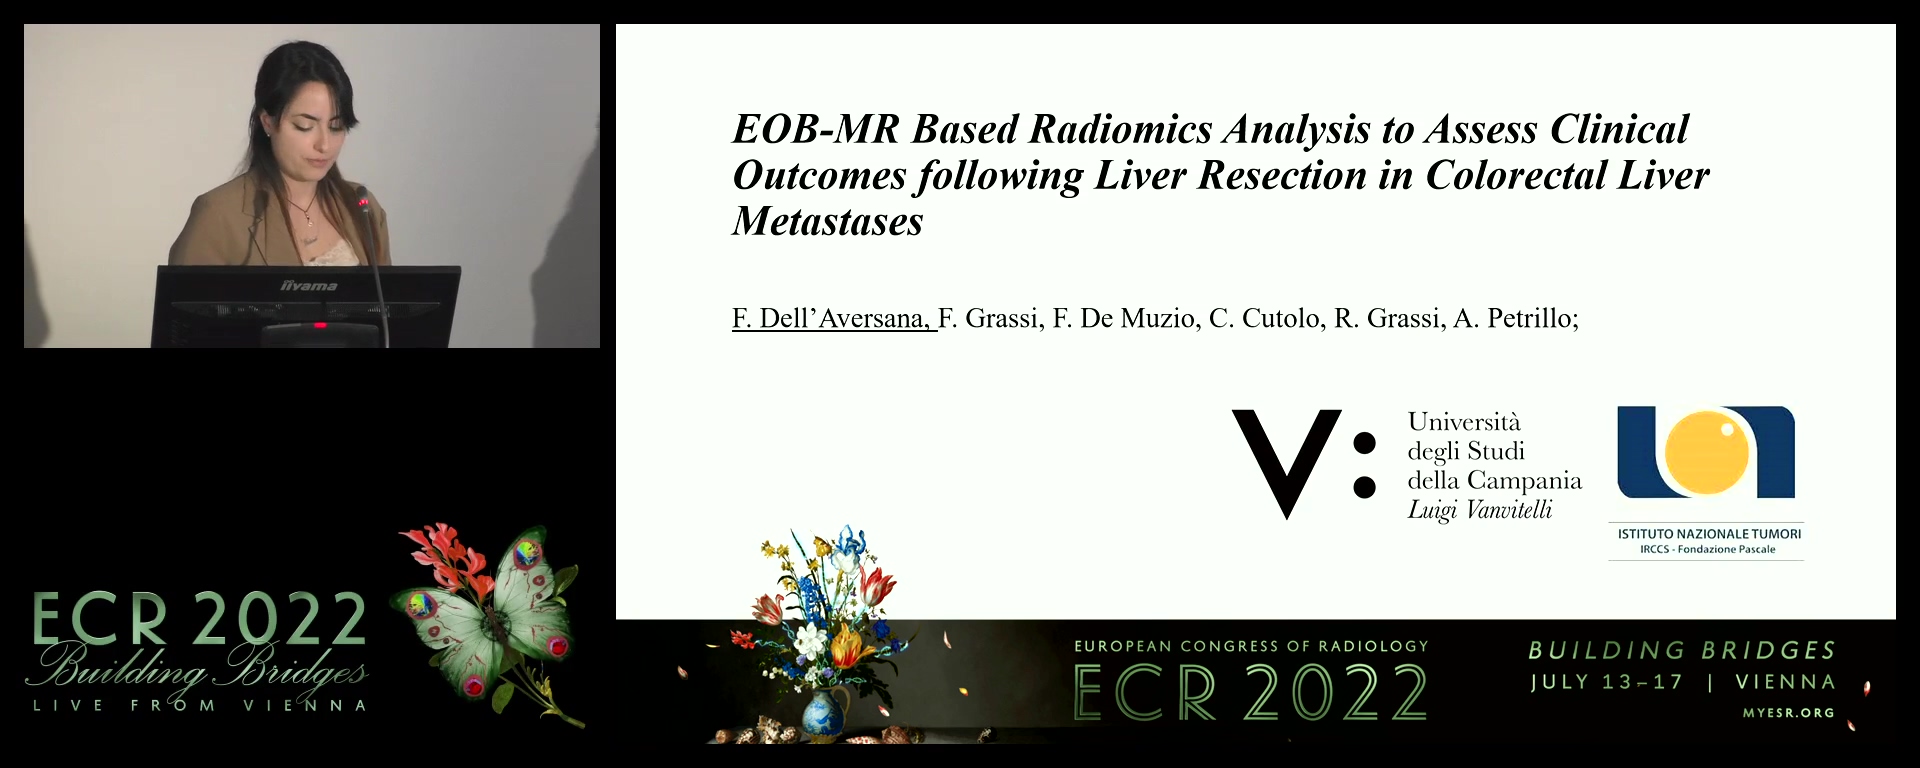 EOB-MR based radiomics analysis to assess clinical outcomes following liver resection in colorectal liver metastases - Federica Dell’Aversana, Naples / IT